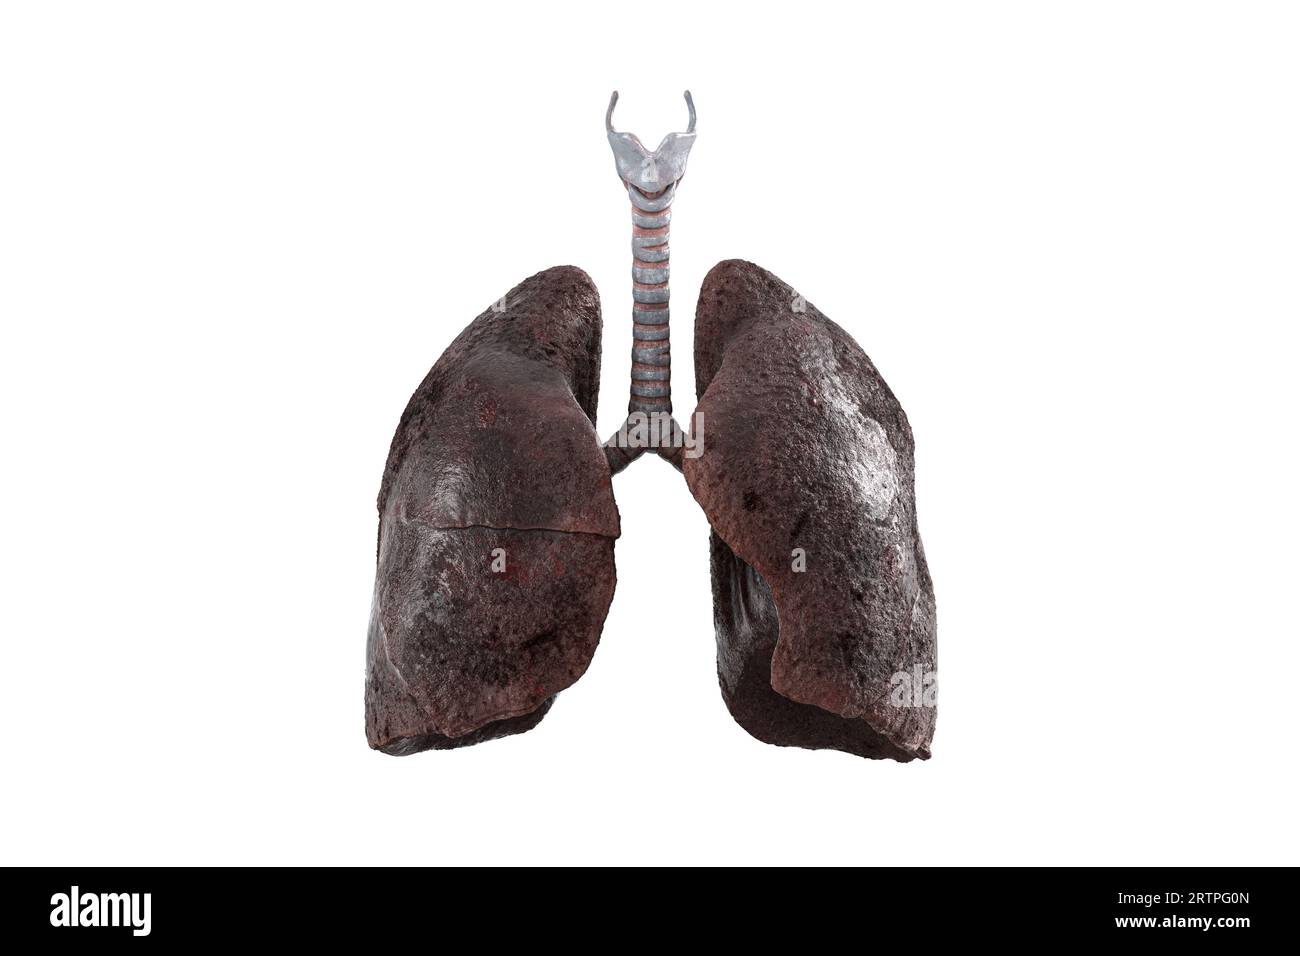 Realistic 3d illustration of sick smoker lungs isolated on white background. Front view of damaged human lungs Stock Photo